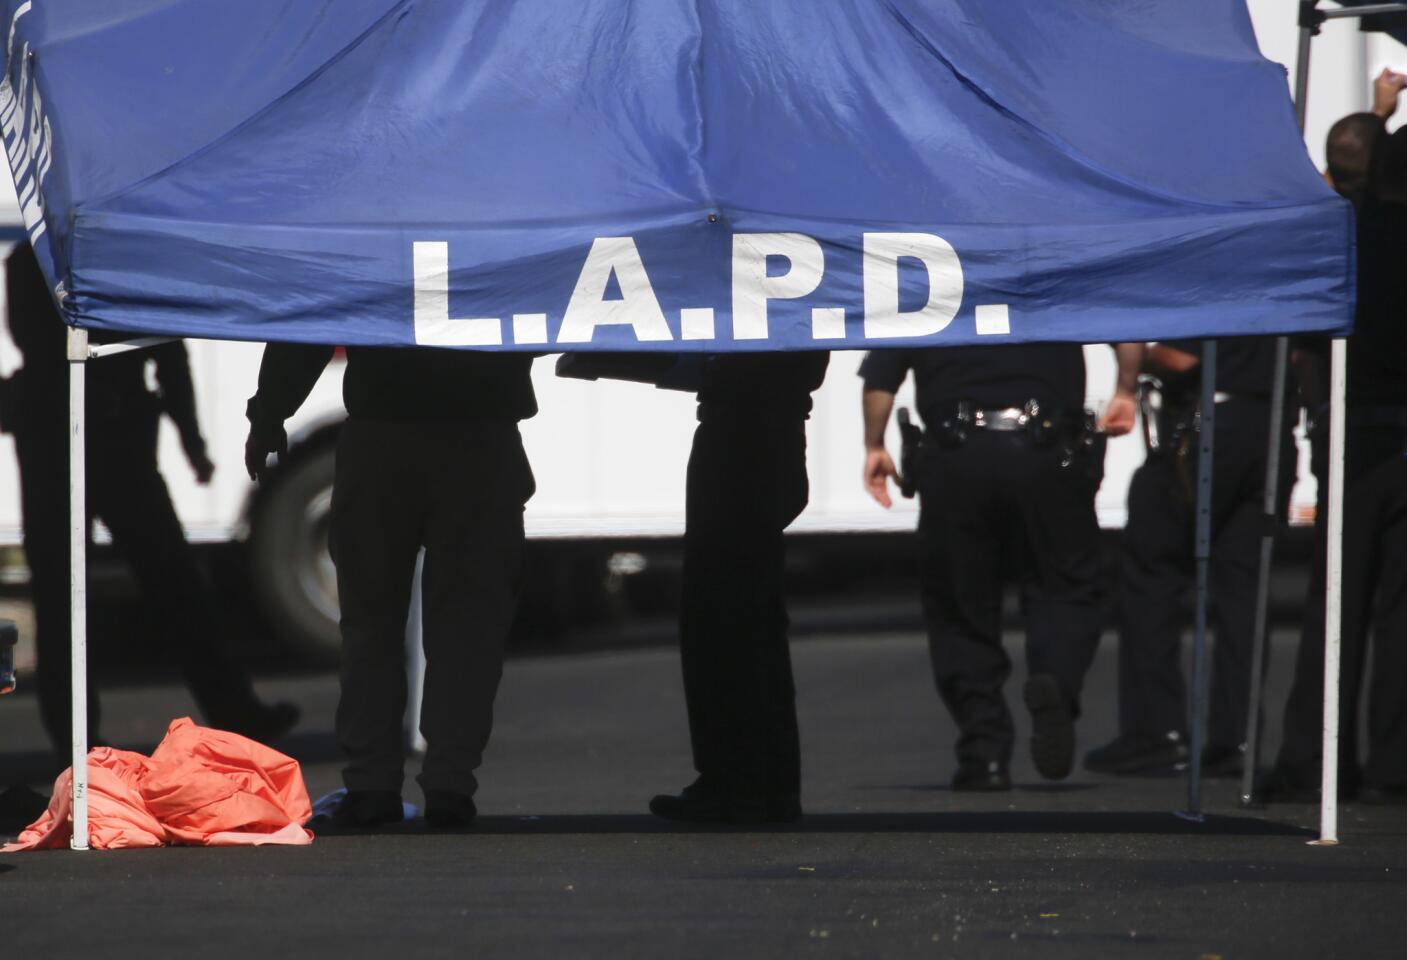 Three boys found fatally stabbed in South L.A. were brothers